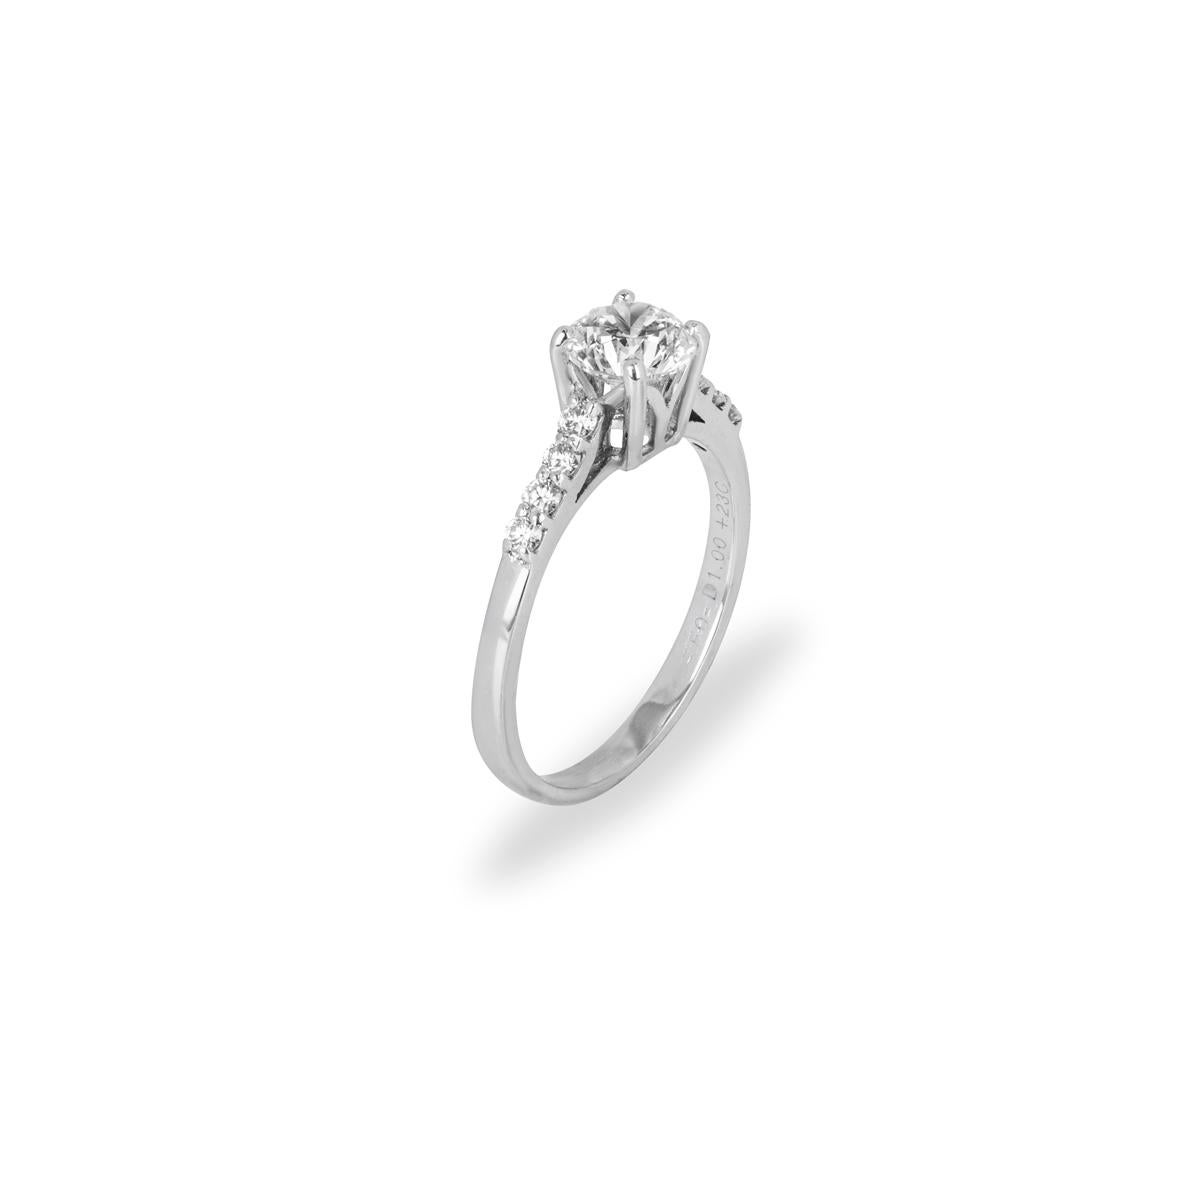 A beautiful 18k white gold diamond engagement ring. The ring is set to the centre with a round brilliant cut diamond in a four claw mount weighing 0.94ct, colour H-I colour and VS clarity. The centre diamond is further complemented with 8 round